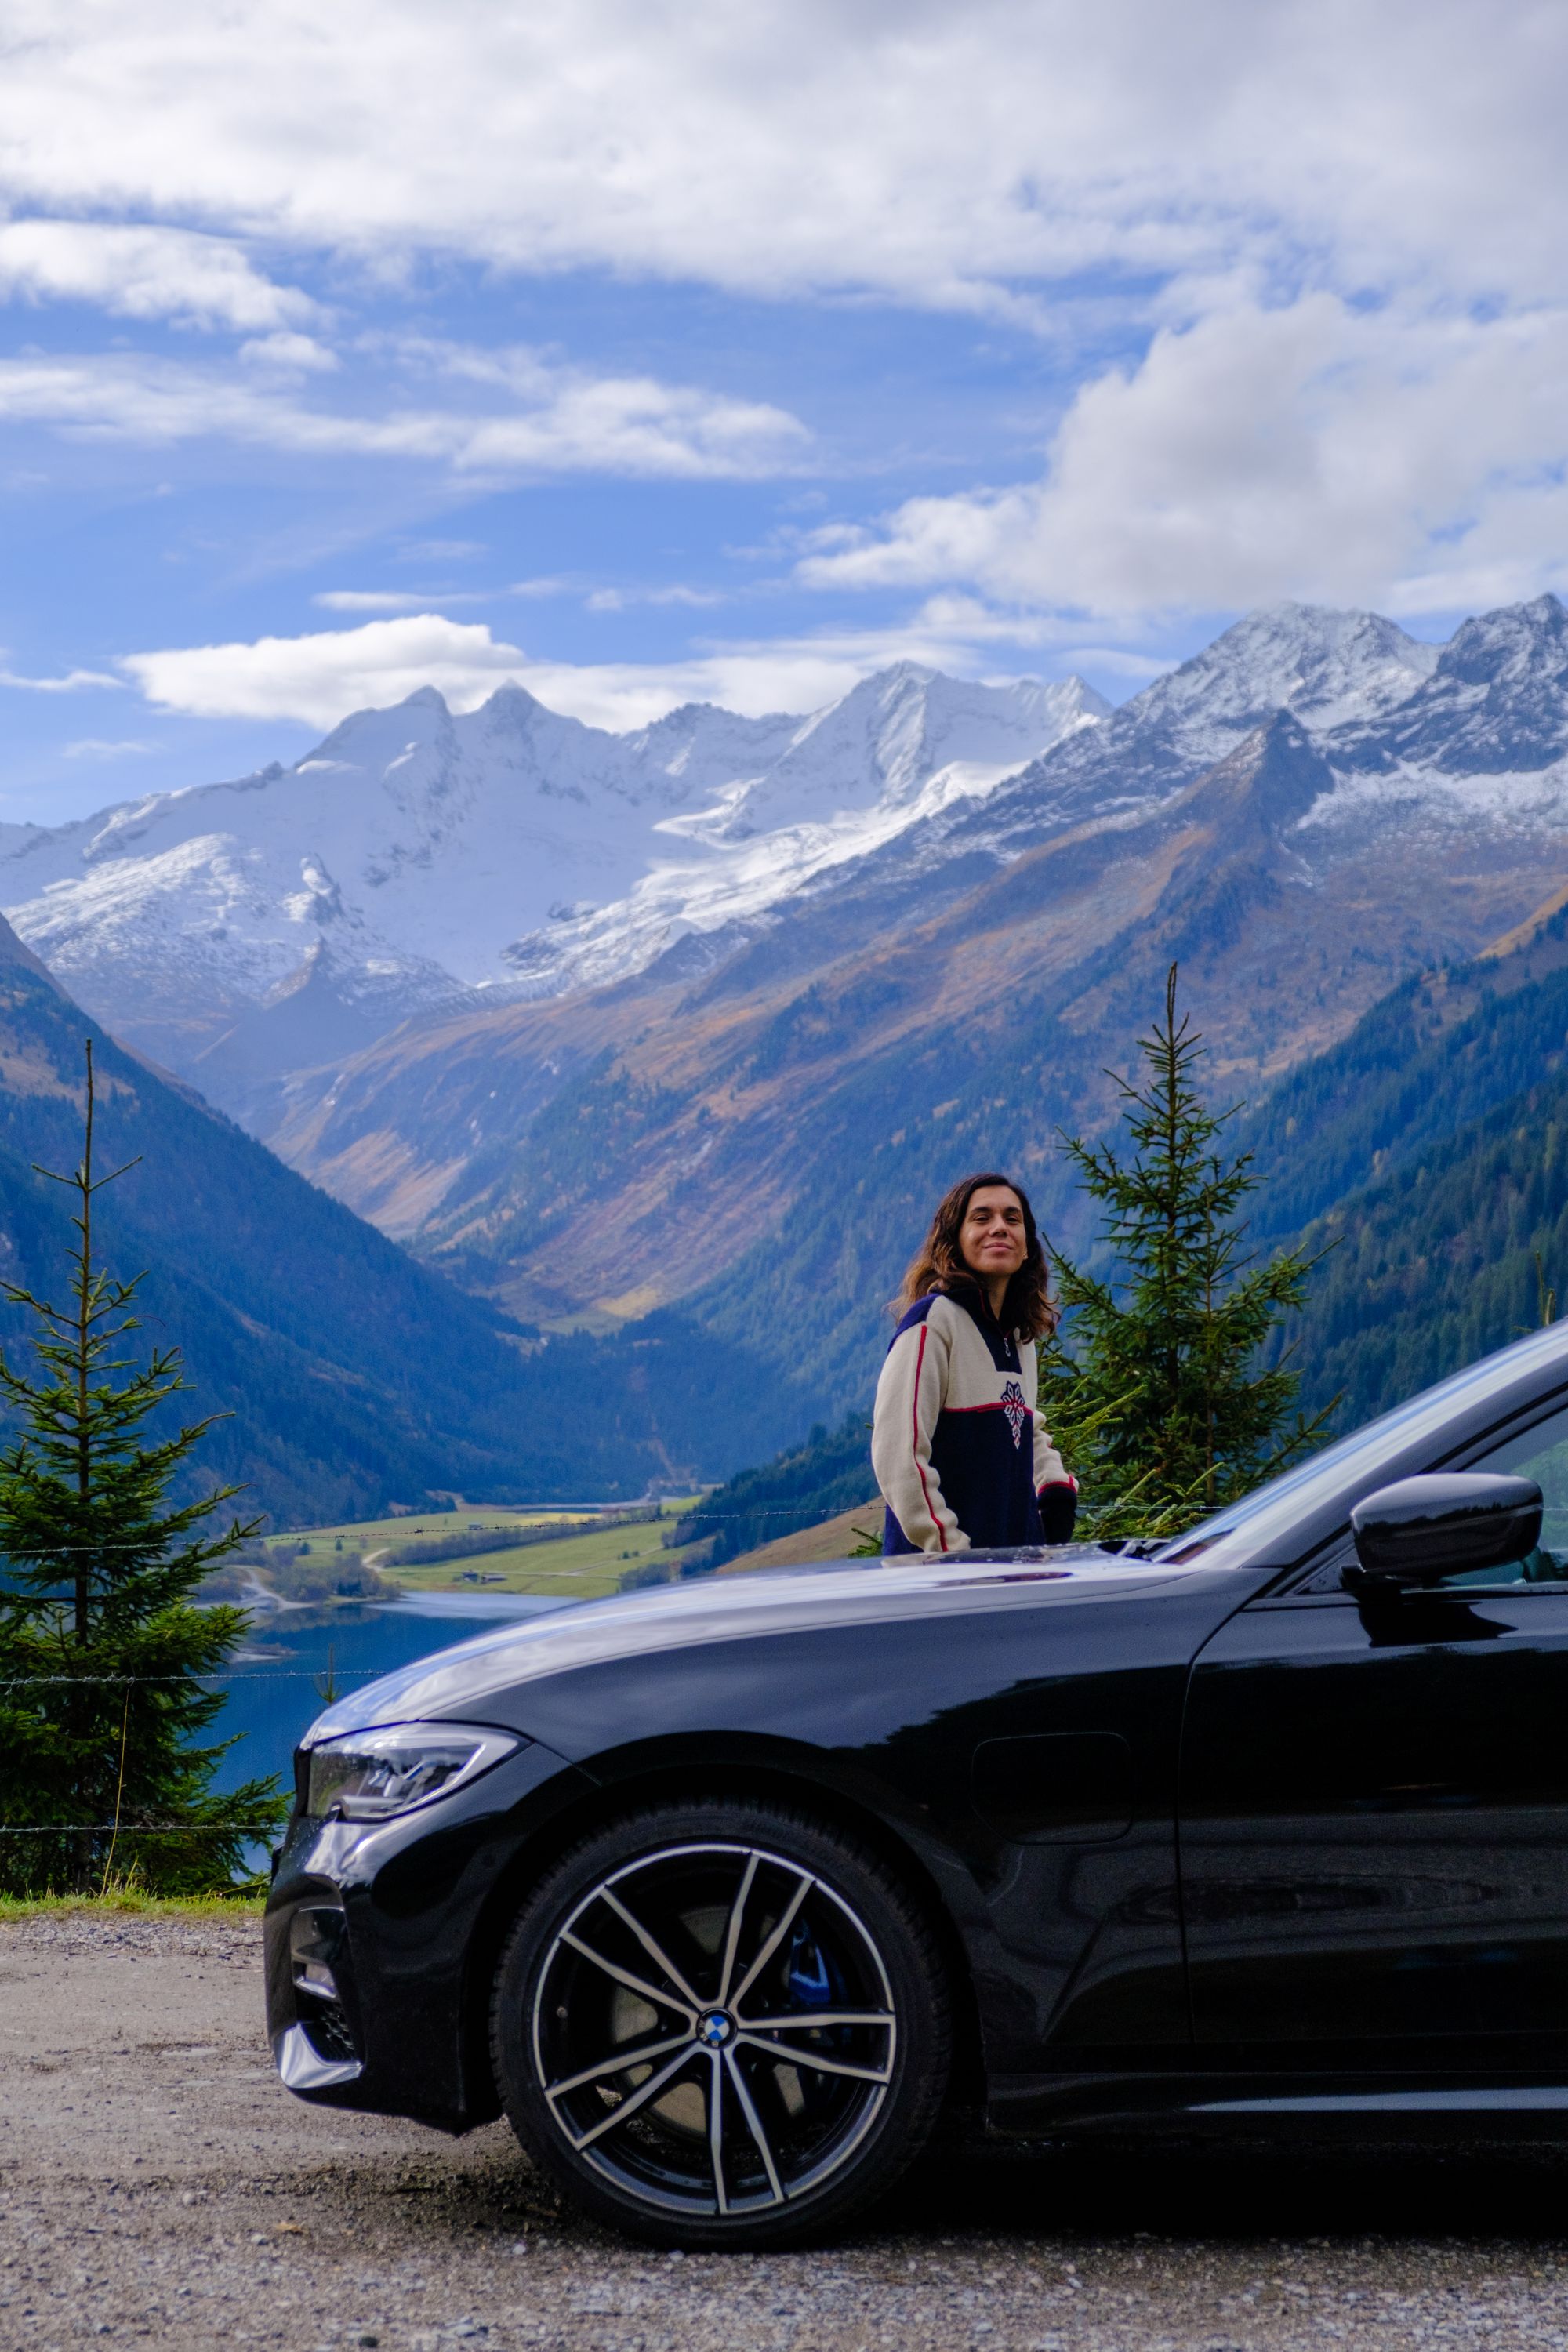 Stopping to admire the lake and and the mountains on the Gerlos pass in Austria during our October 2022 trip